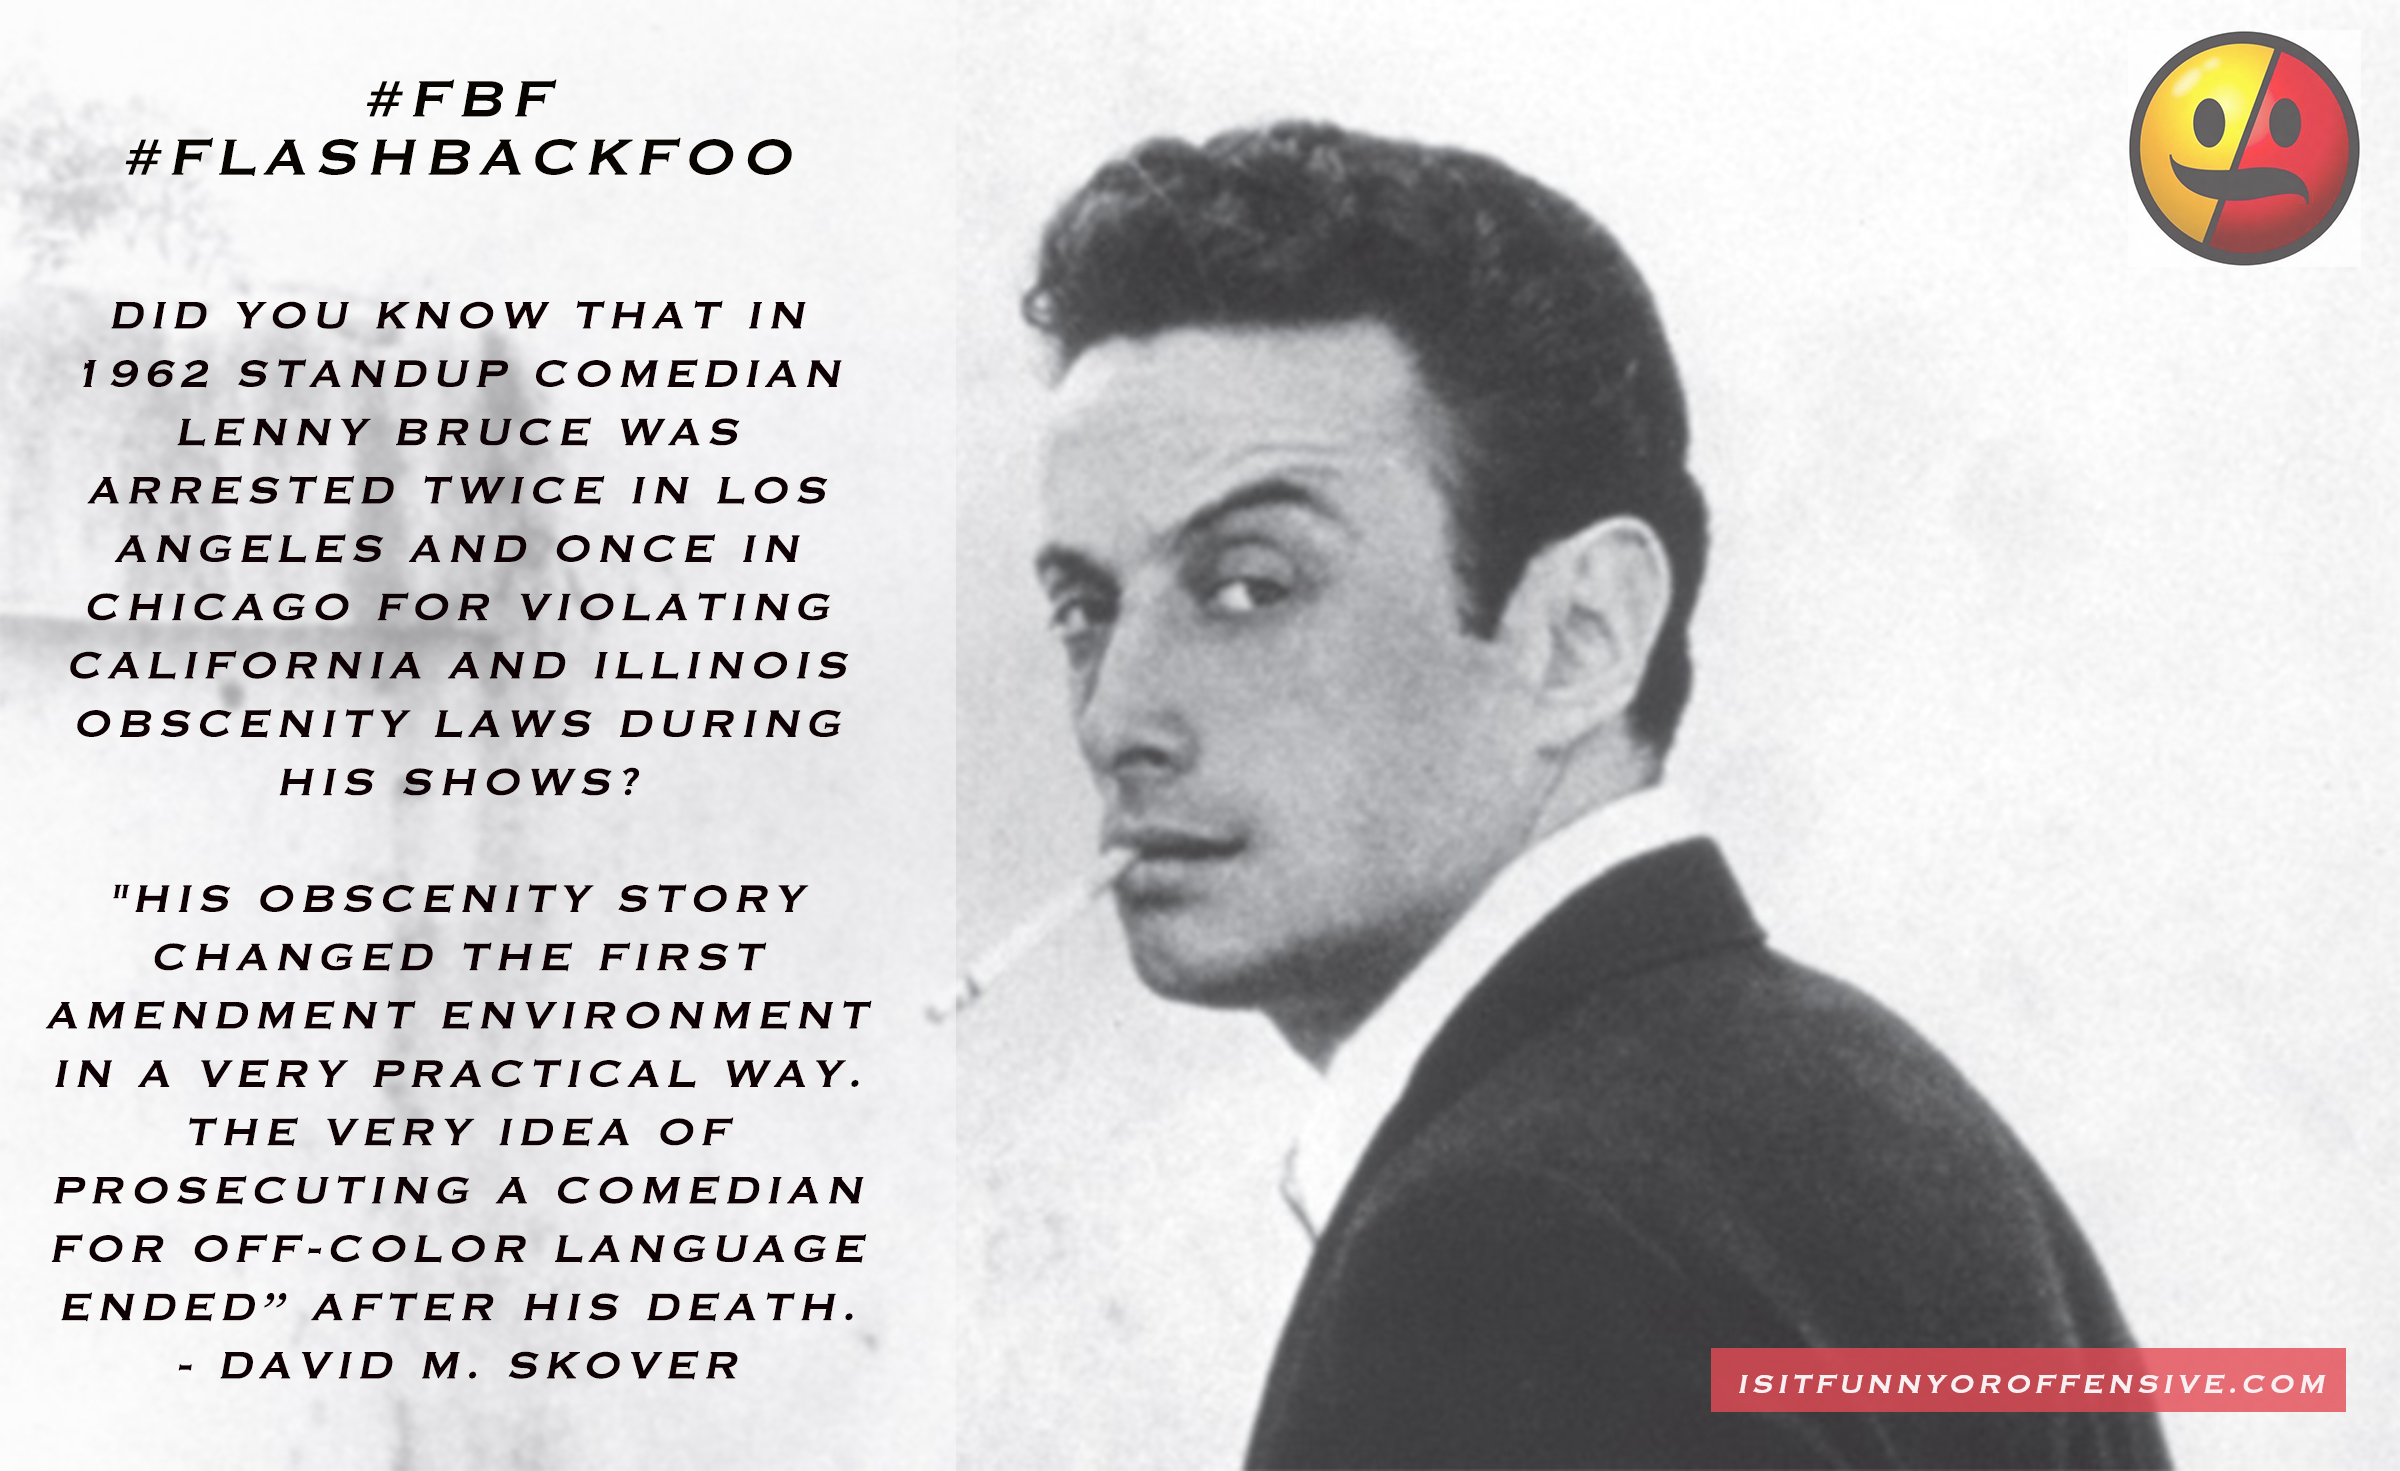 A Look Back On Lenny Bruce's "Offensive" Comedy